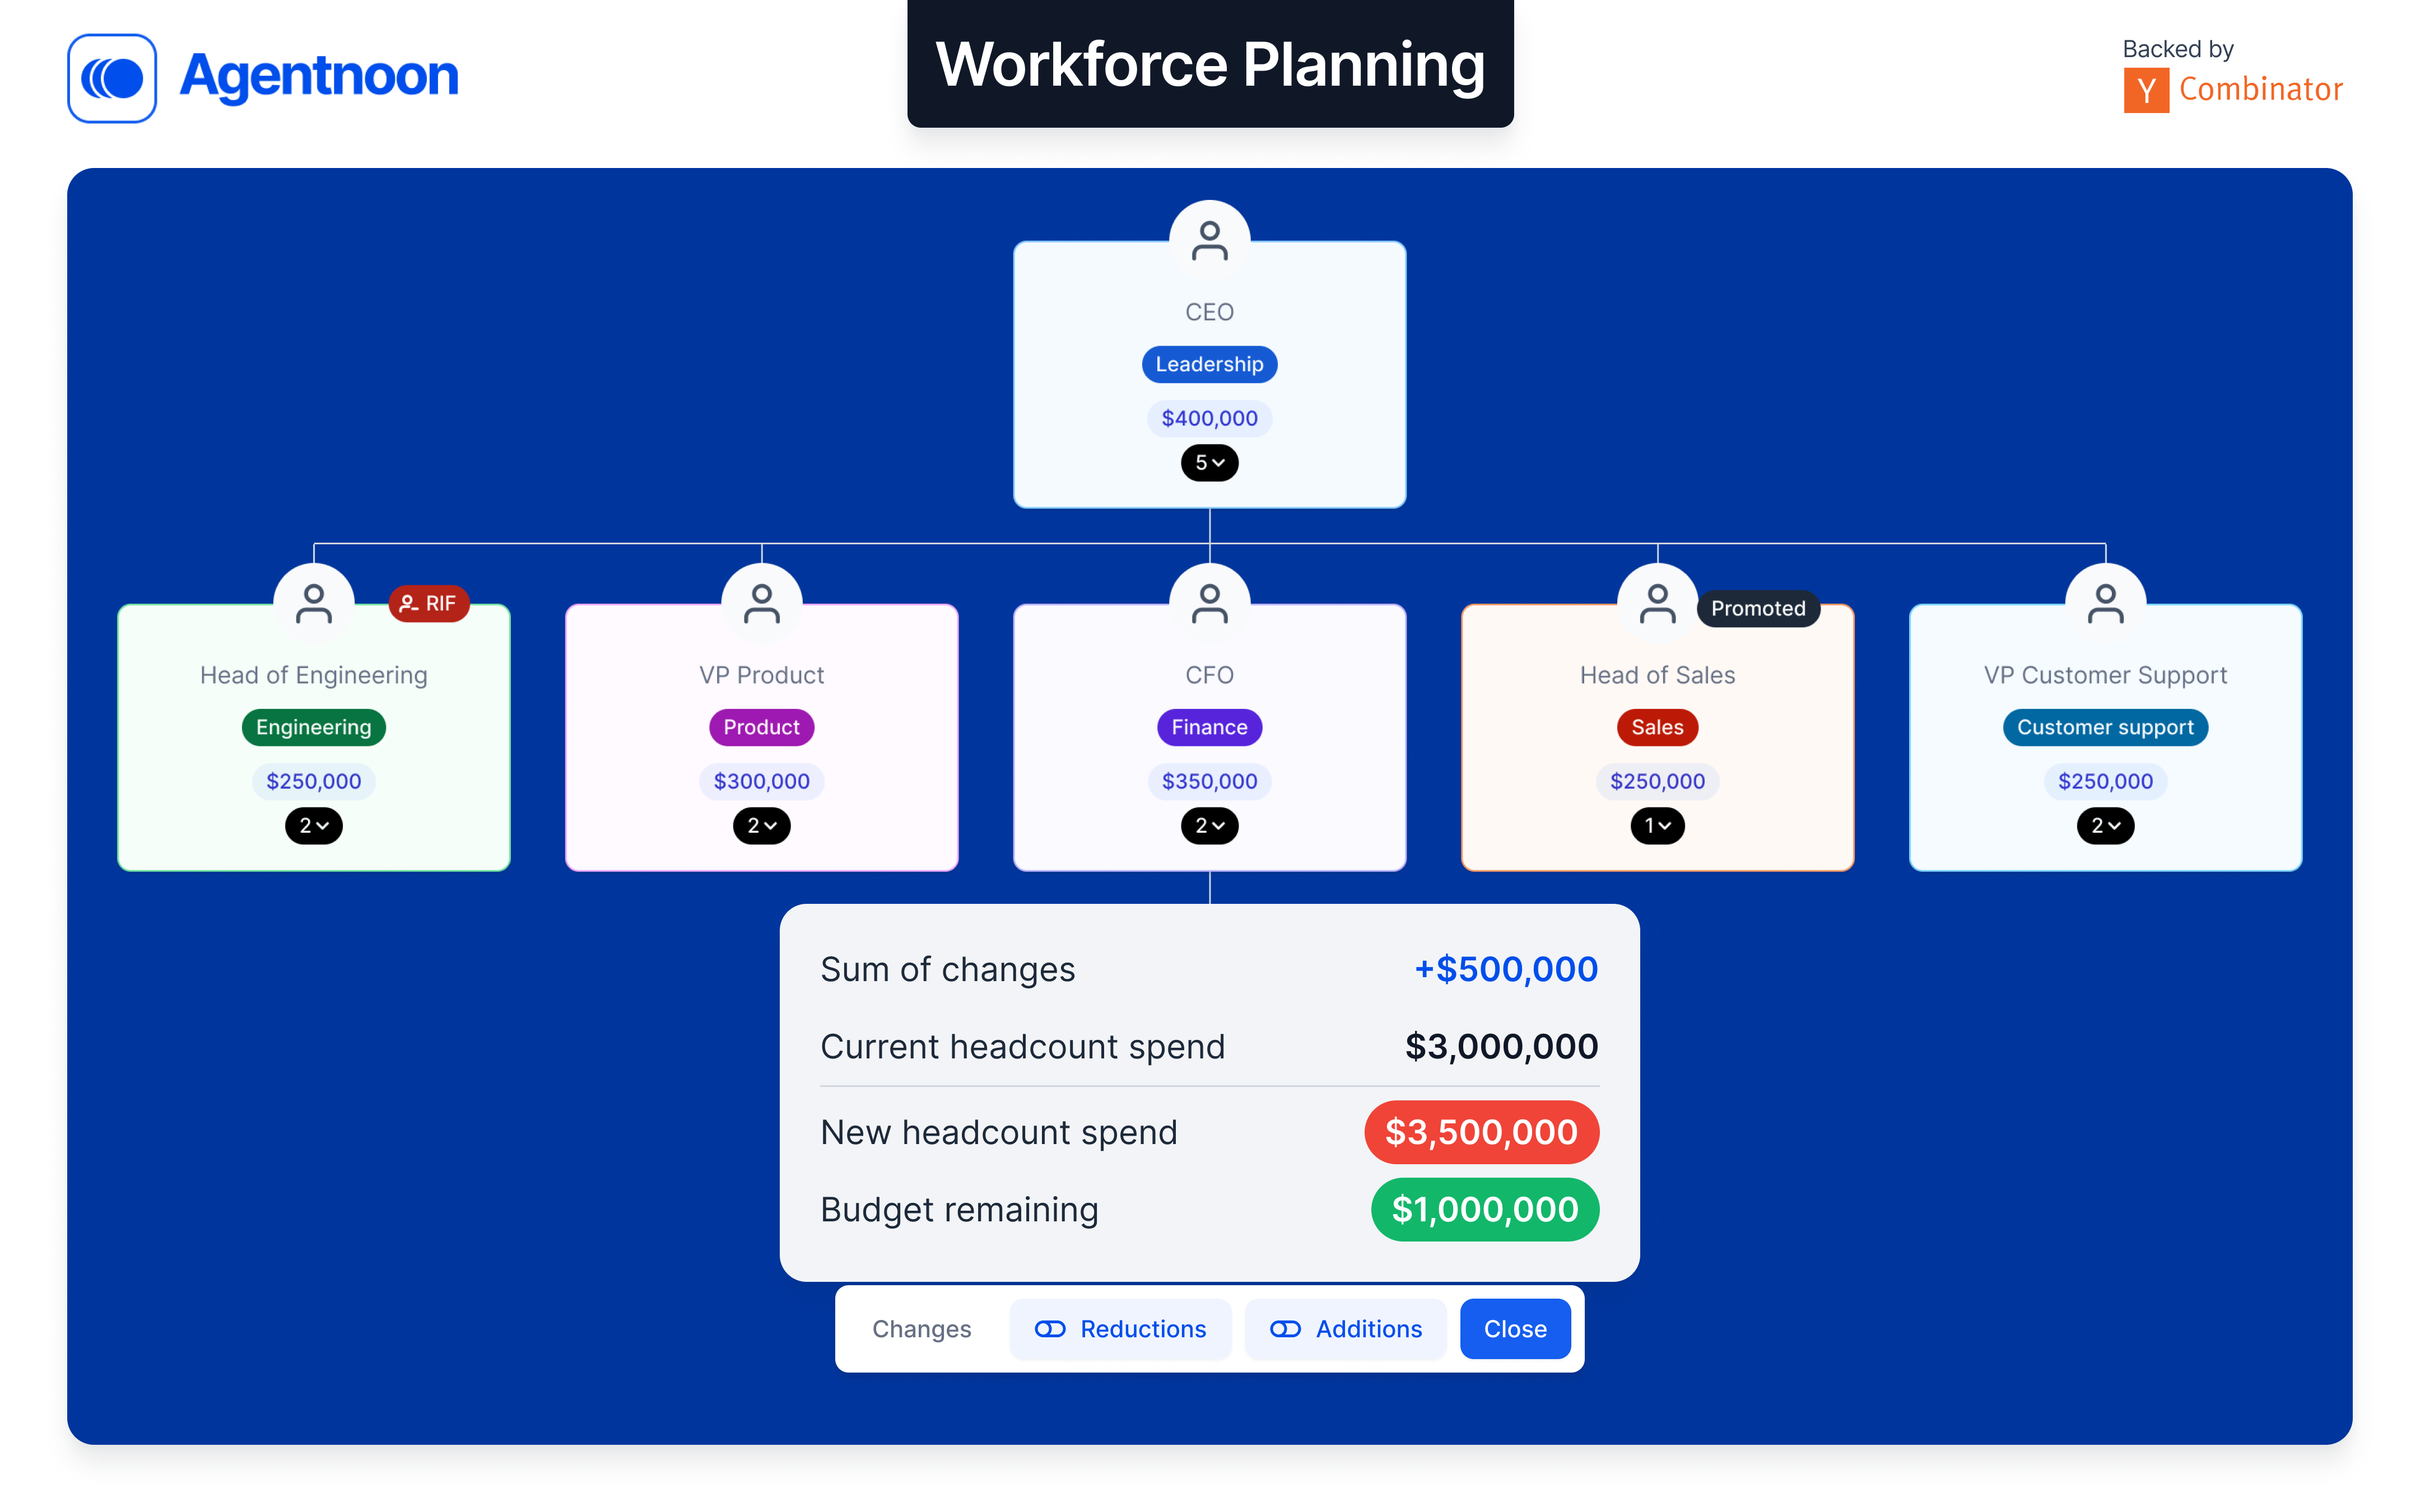 Simple workforce planning, save time and money. Be prepared for any business scenario.